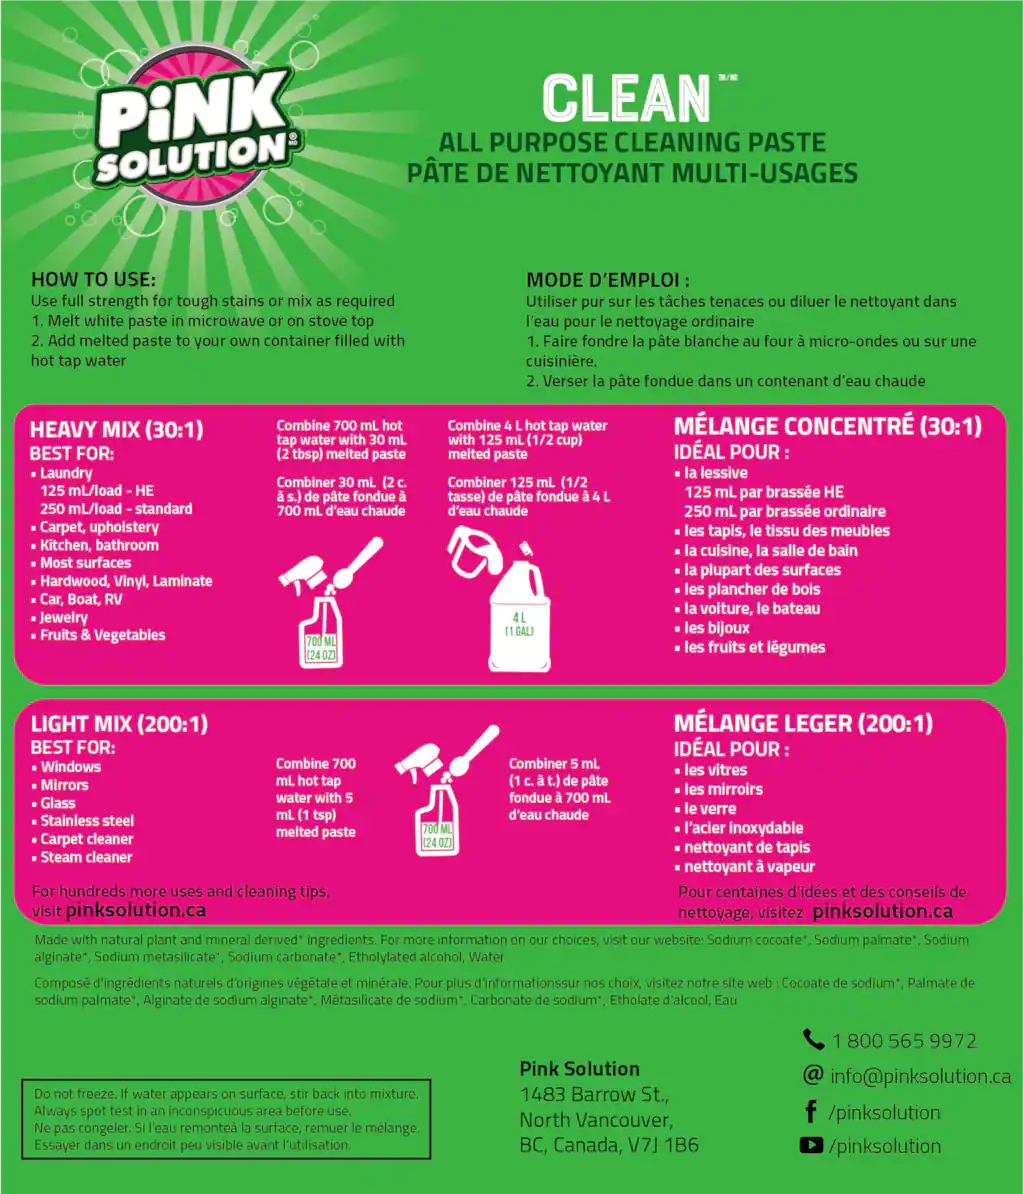 Pink Solution CLEAN All Purpose Cleaner, 500-ml